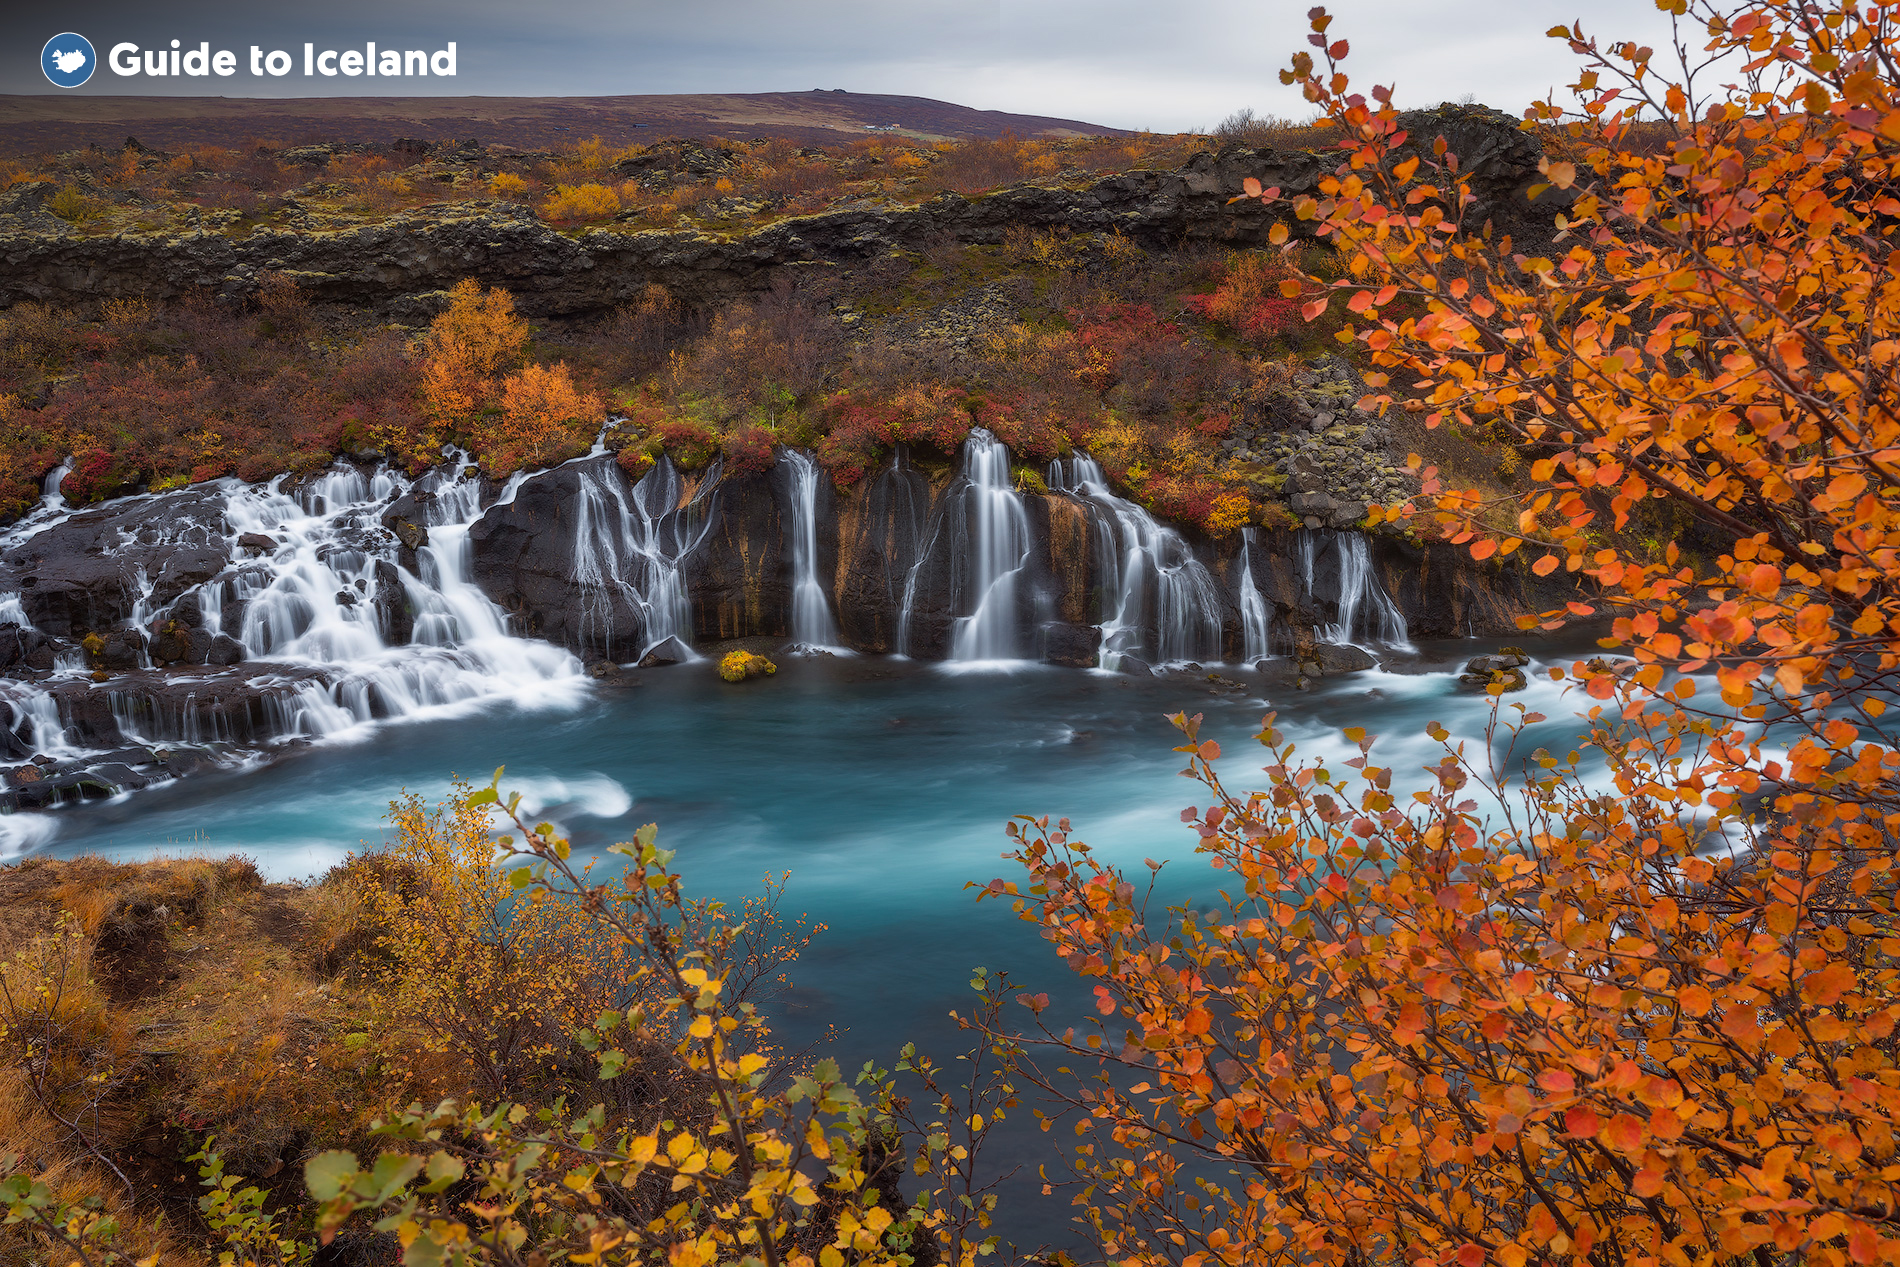 Hraunfossar is surrounded by vegetation, which always reflects and exaggerates the season, as seen with this autumnal shot